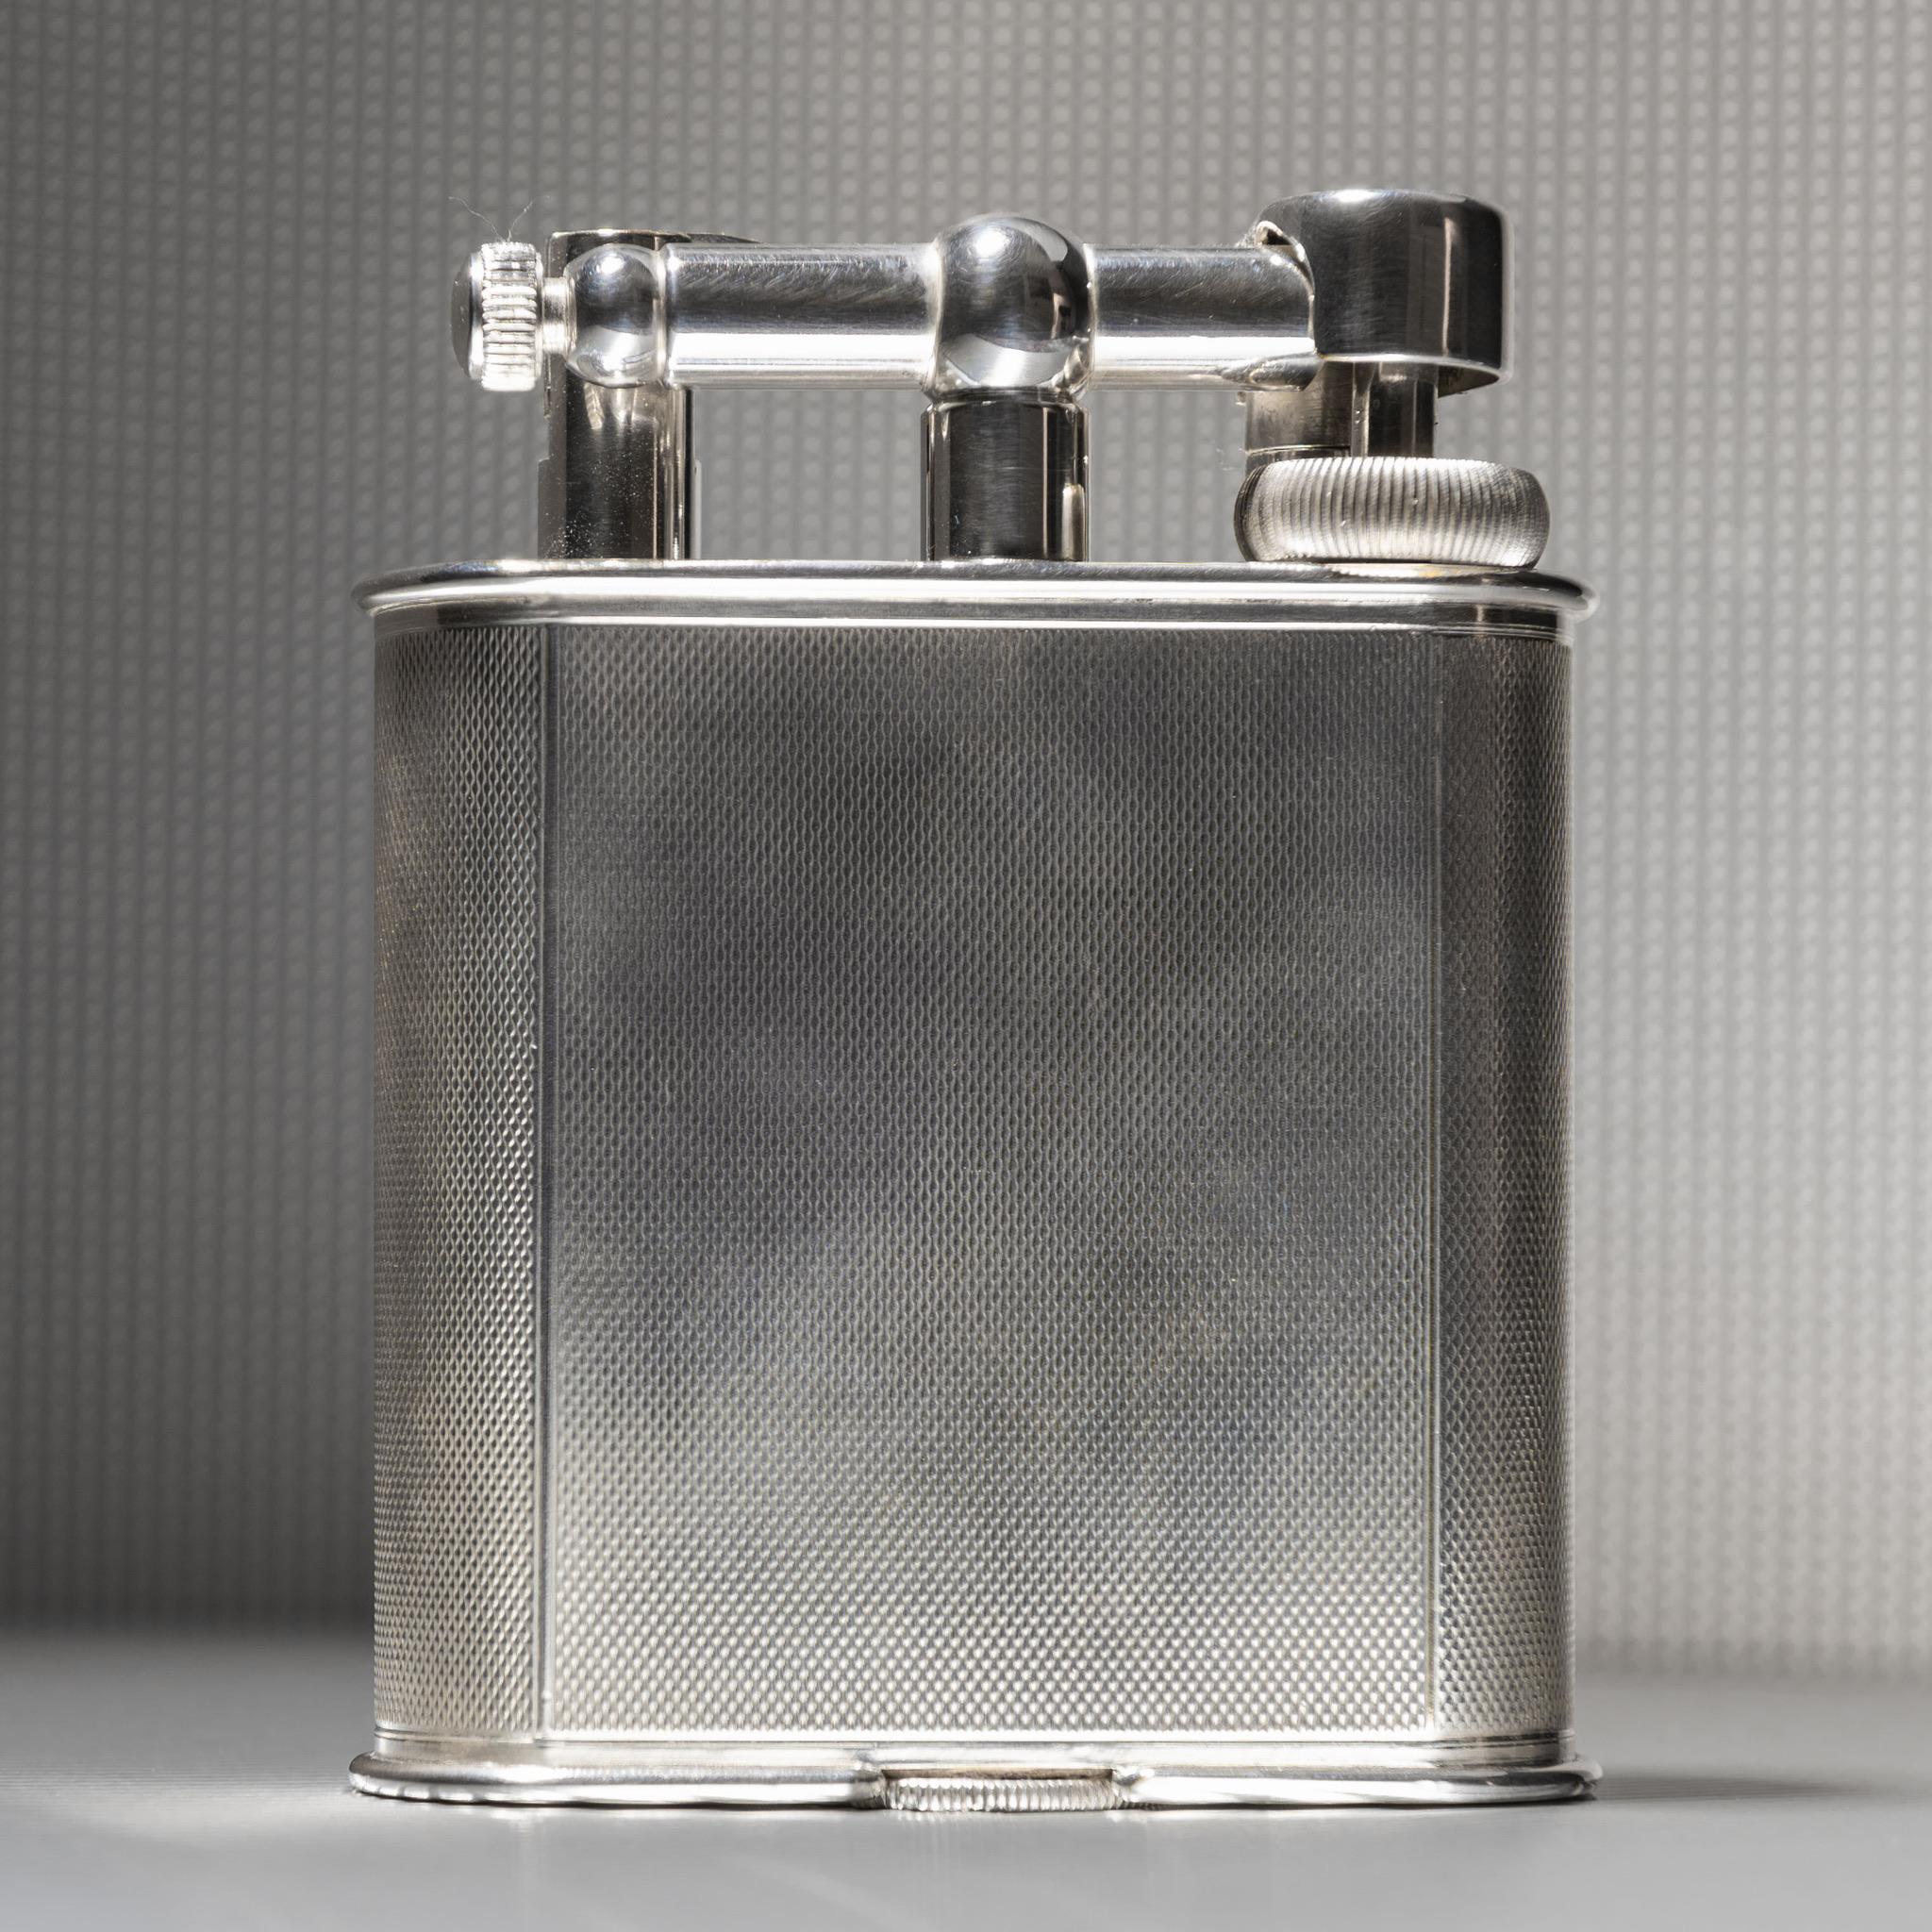 A fine engine turned silver plated Dunhill lighter for table or desk; circa 1948. The 'Giant' lighter was first seen in the Dunhill catalogue in 1929 and was an immediate success.

Dimensions: 10.5 cm/4? inches (height) x 8 cm/3? inches (width) x